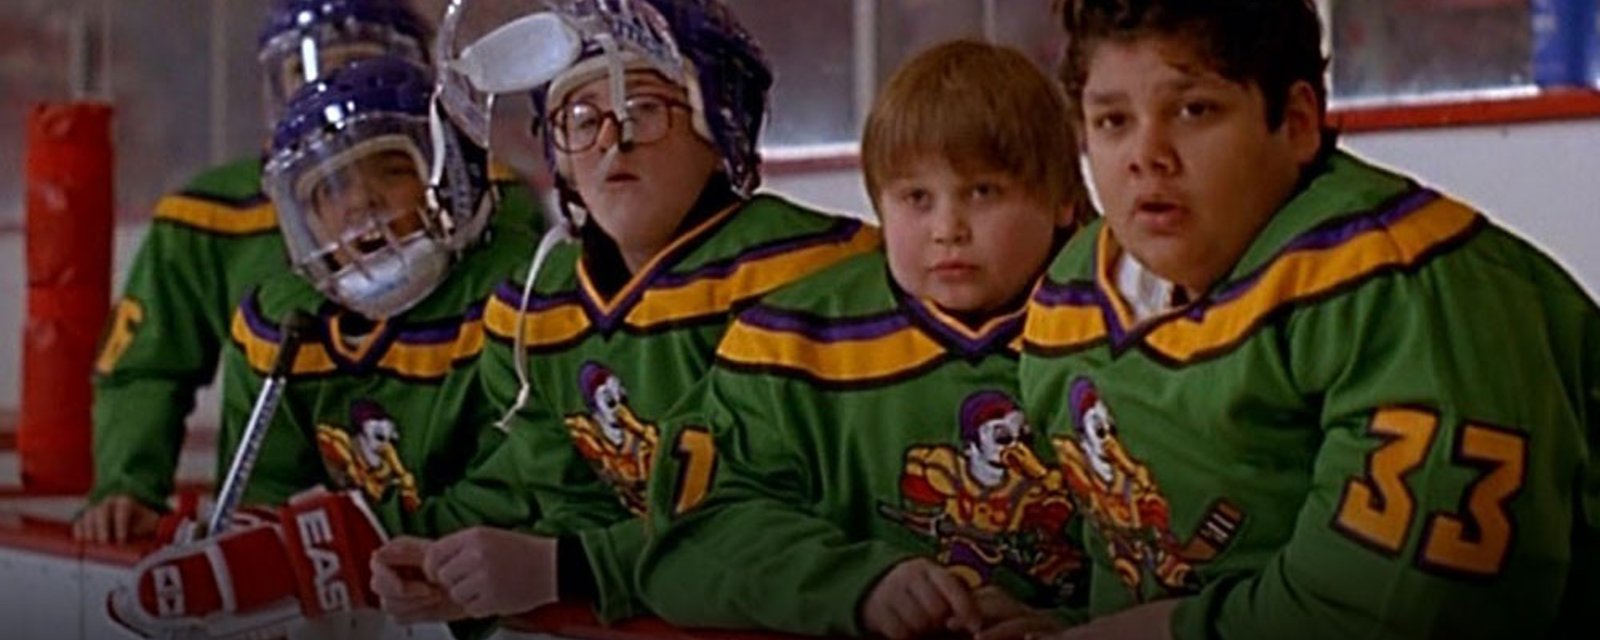 Breaking: Mighty Ducks actor busted again just 5 days after release